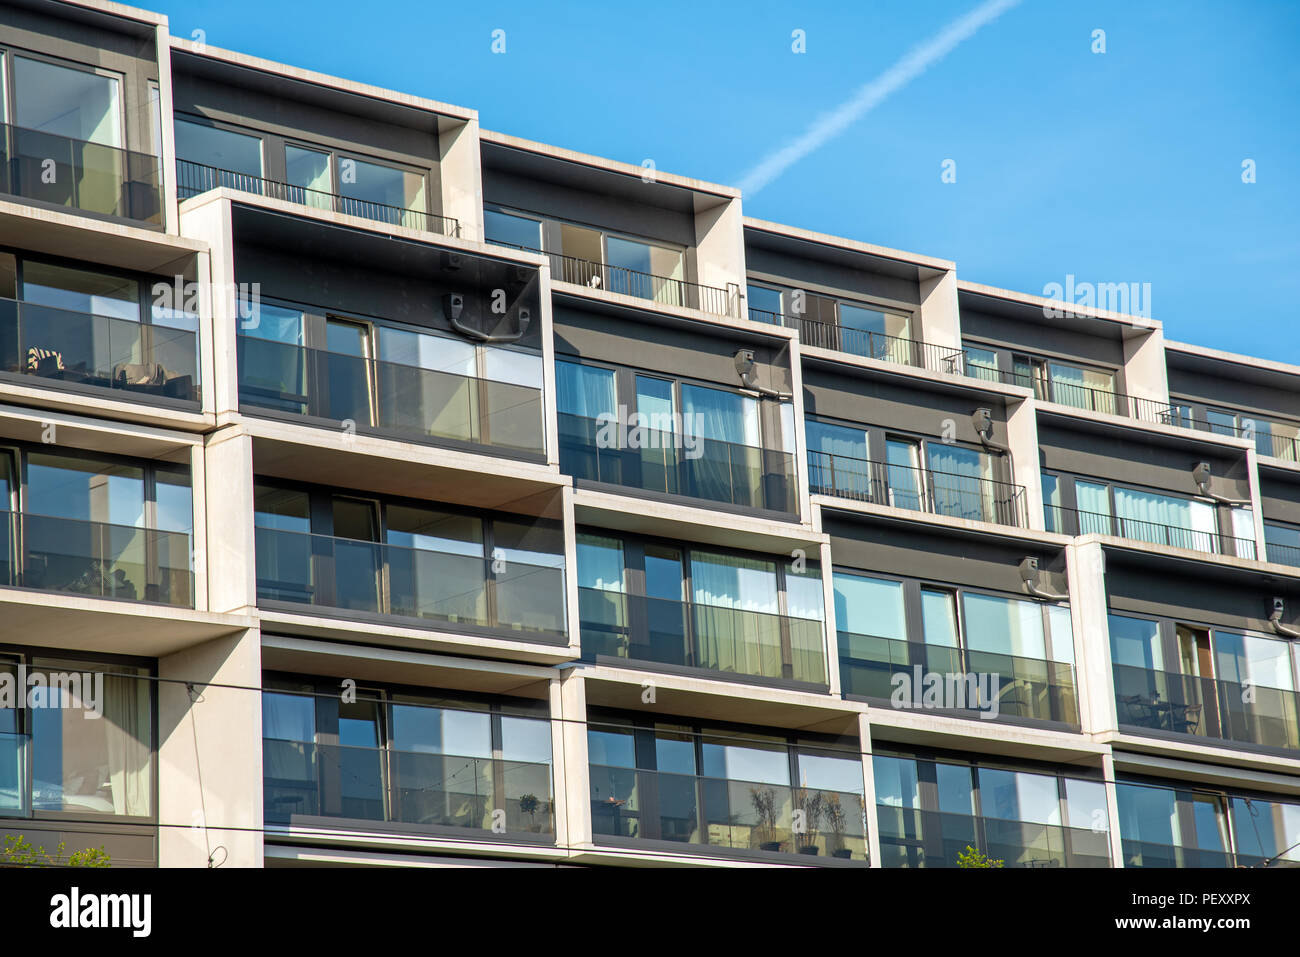 Facade of a modern housing construction with a lot of balconies seen in Berlin, Germany Stock Photo